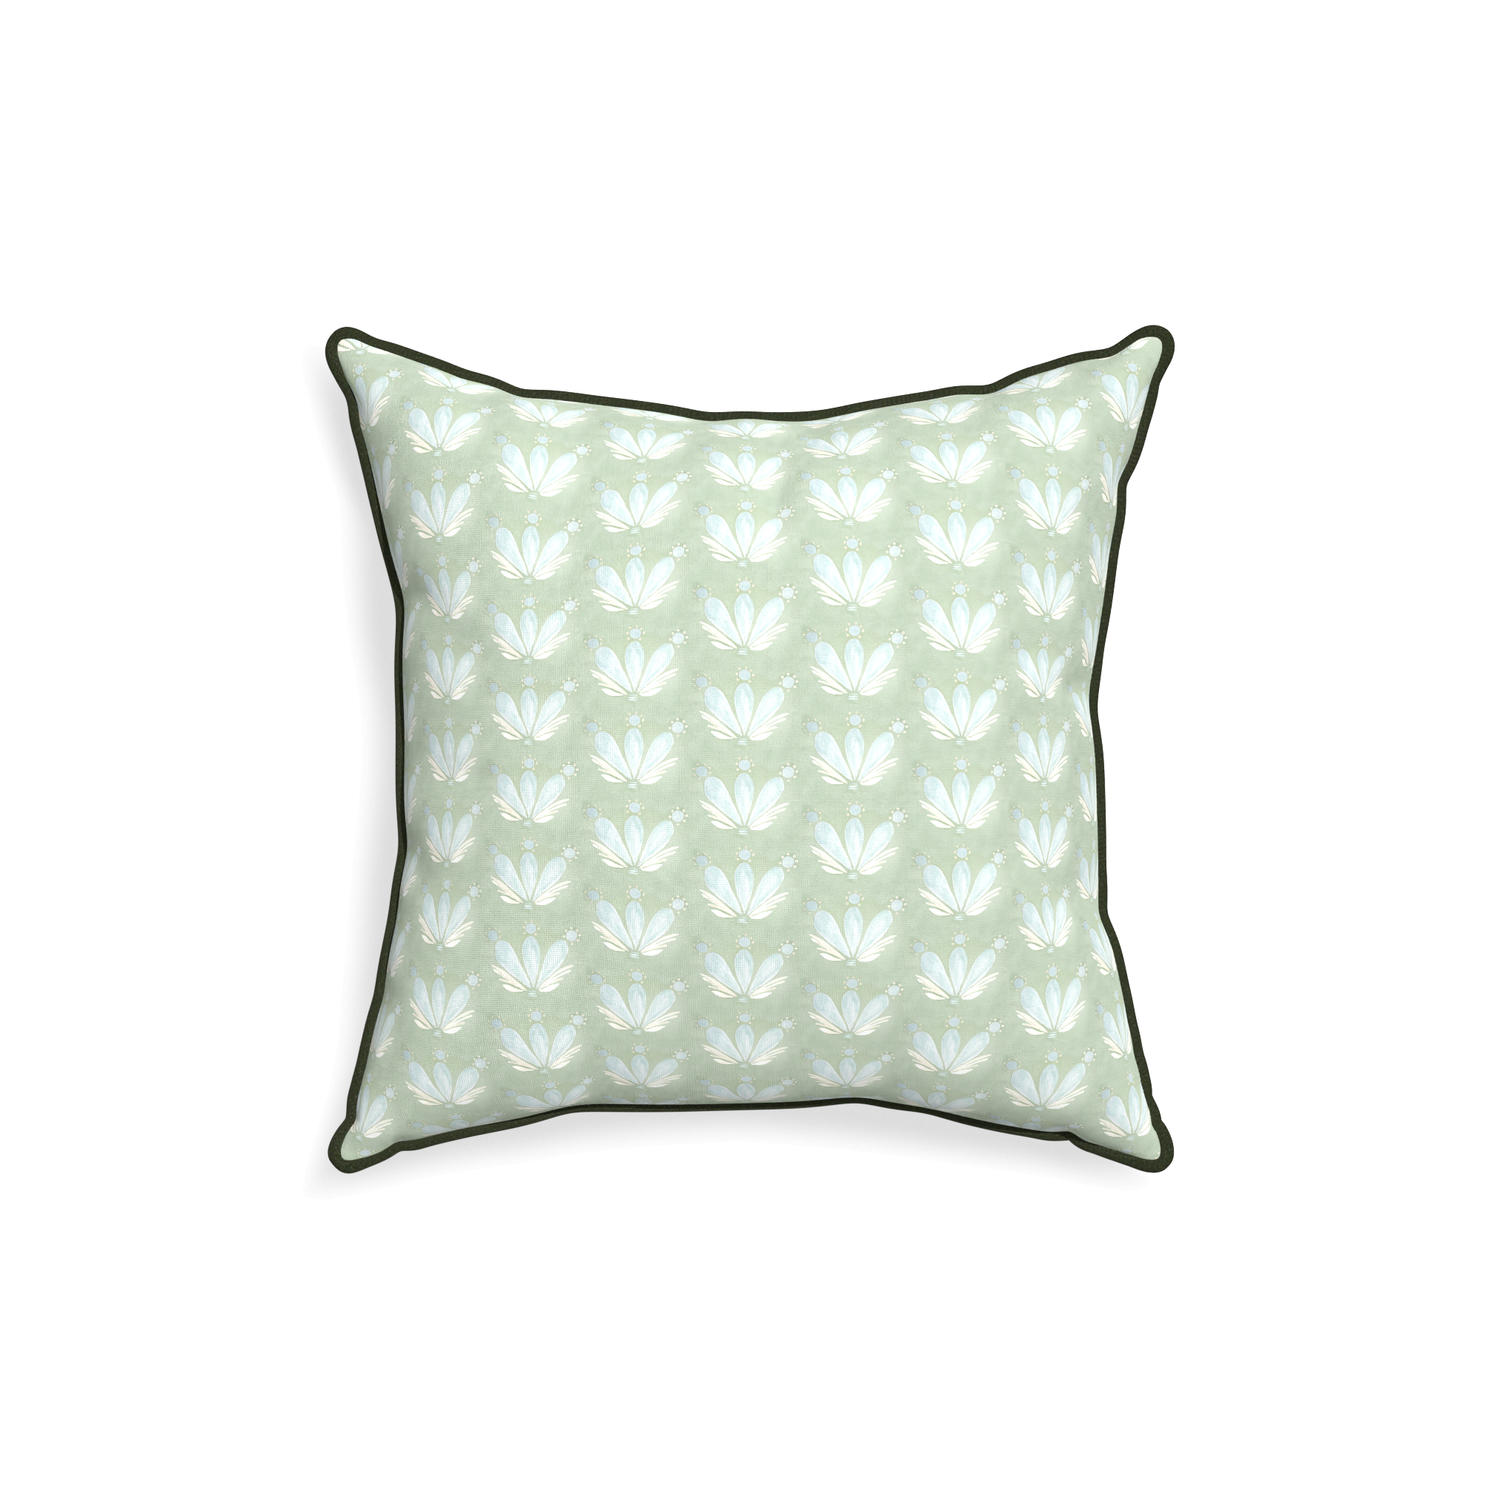 18-square serena sea salt custom blue & green floral drop repeatpillow with f piping on white background